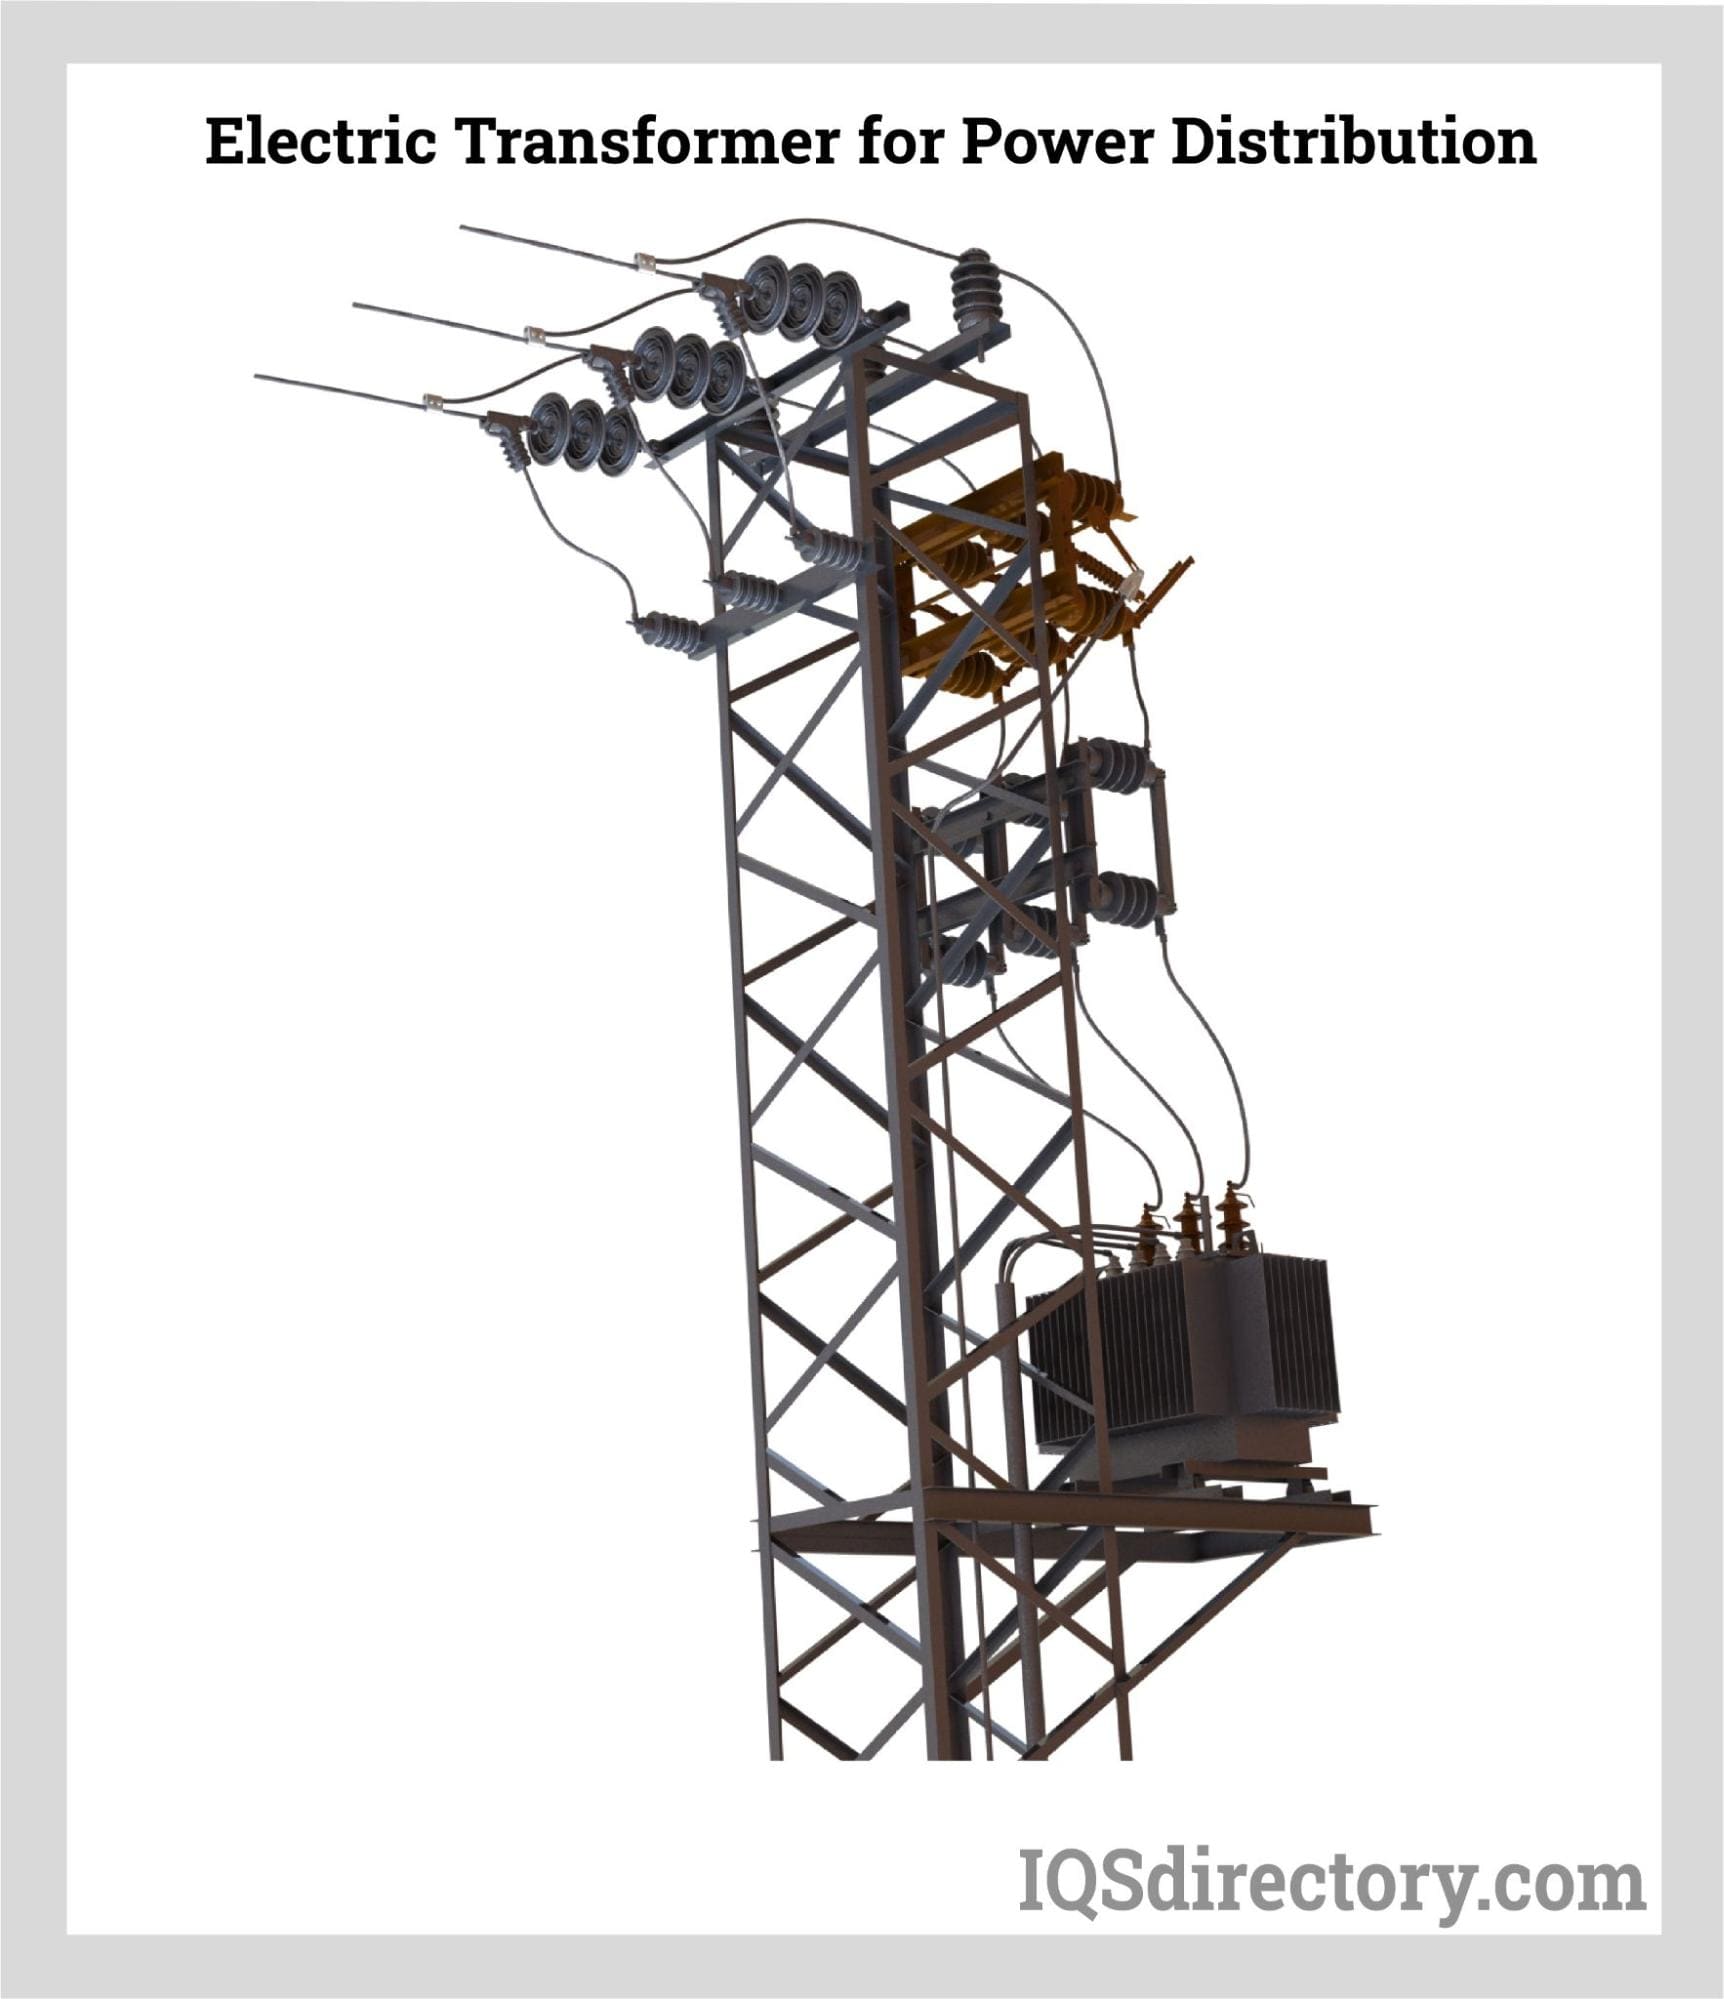 Electric Transformer for Power Distribution